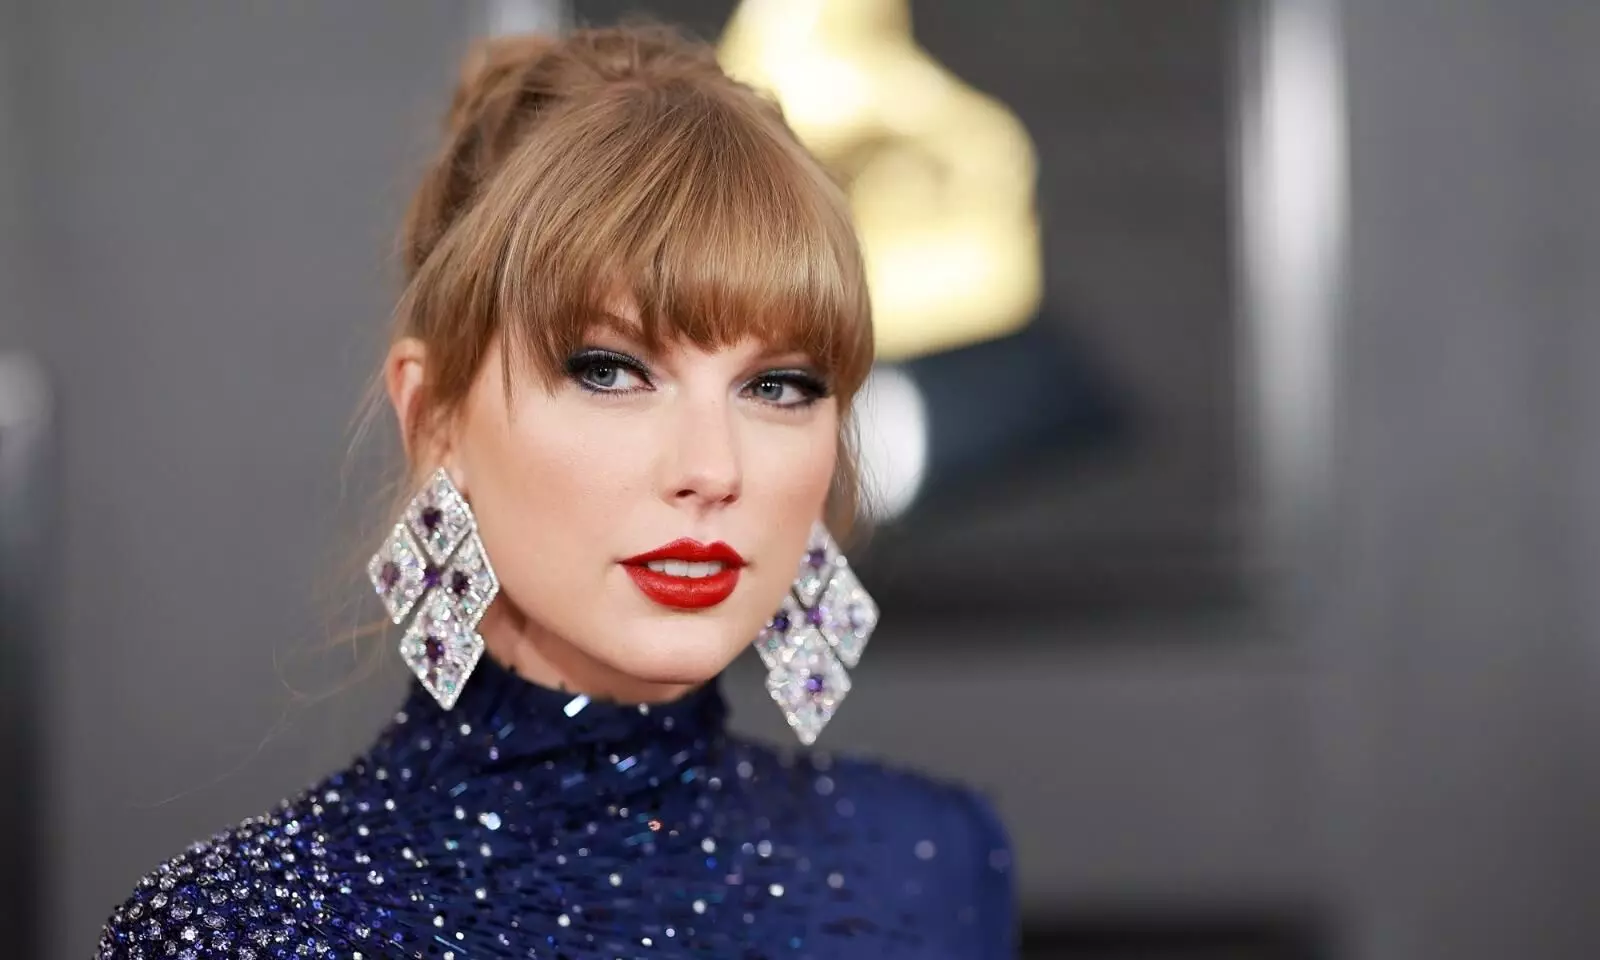 Taylor Swift AI deepfake images: White House ‘alarmed’, seeks law